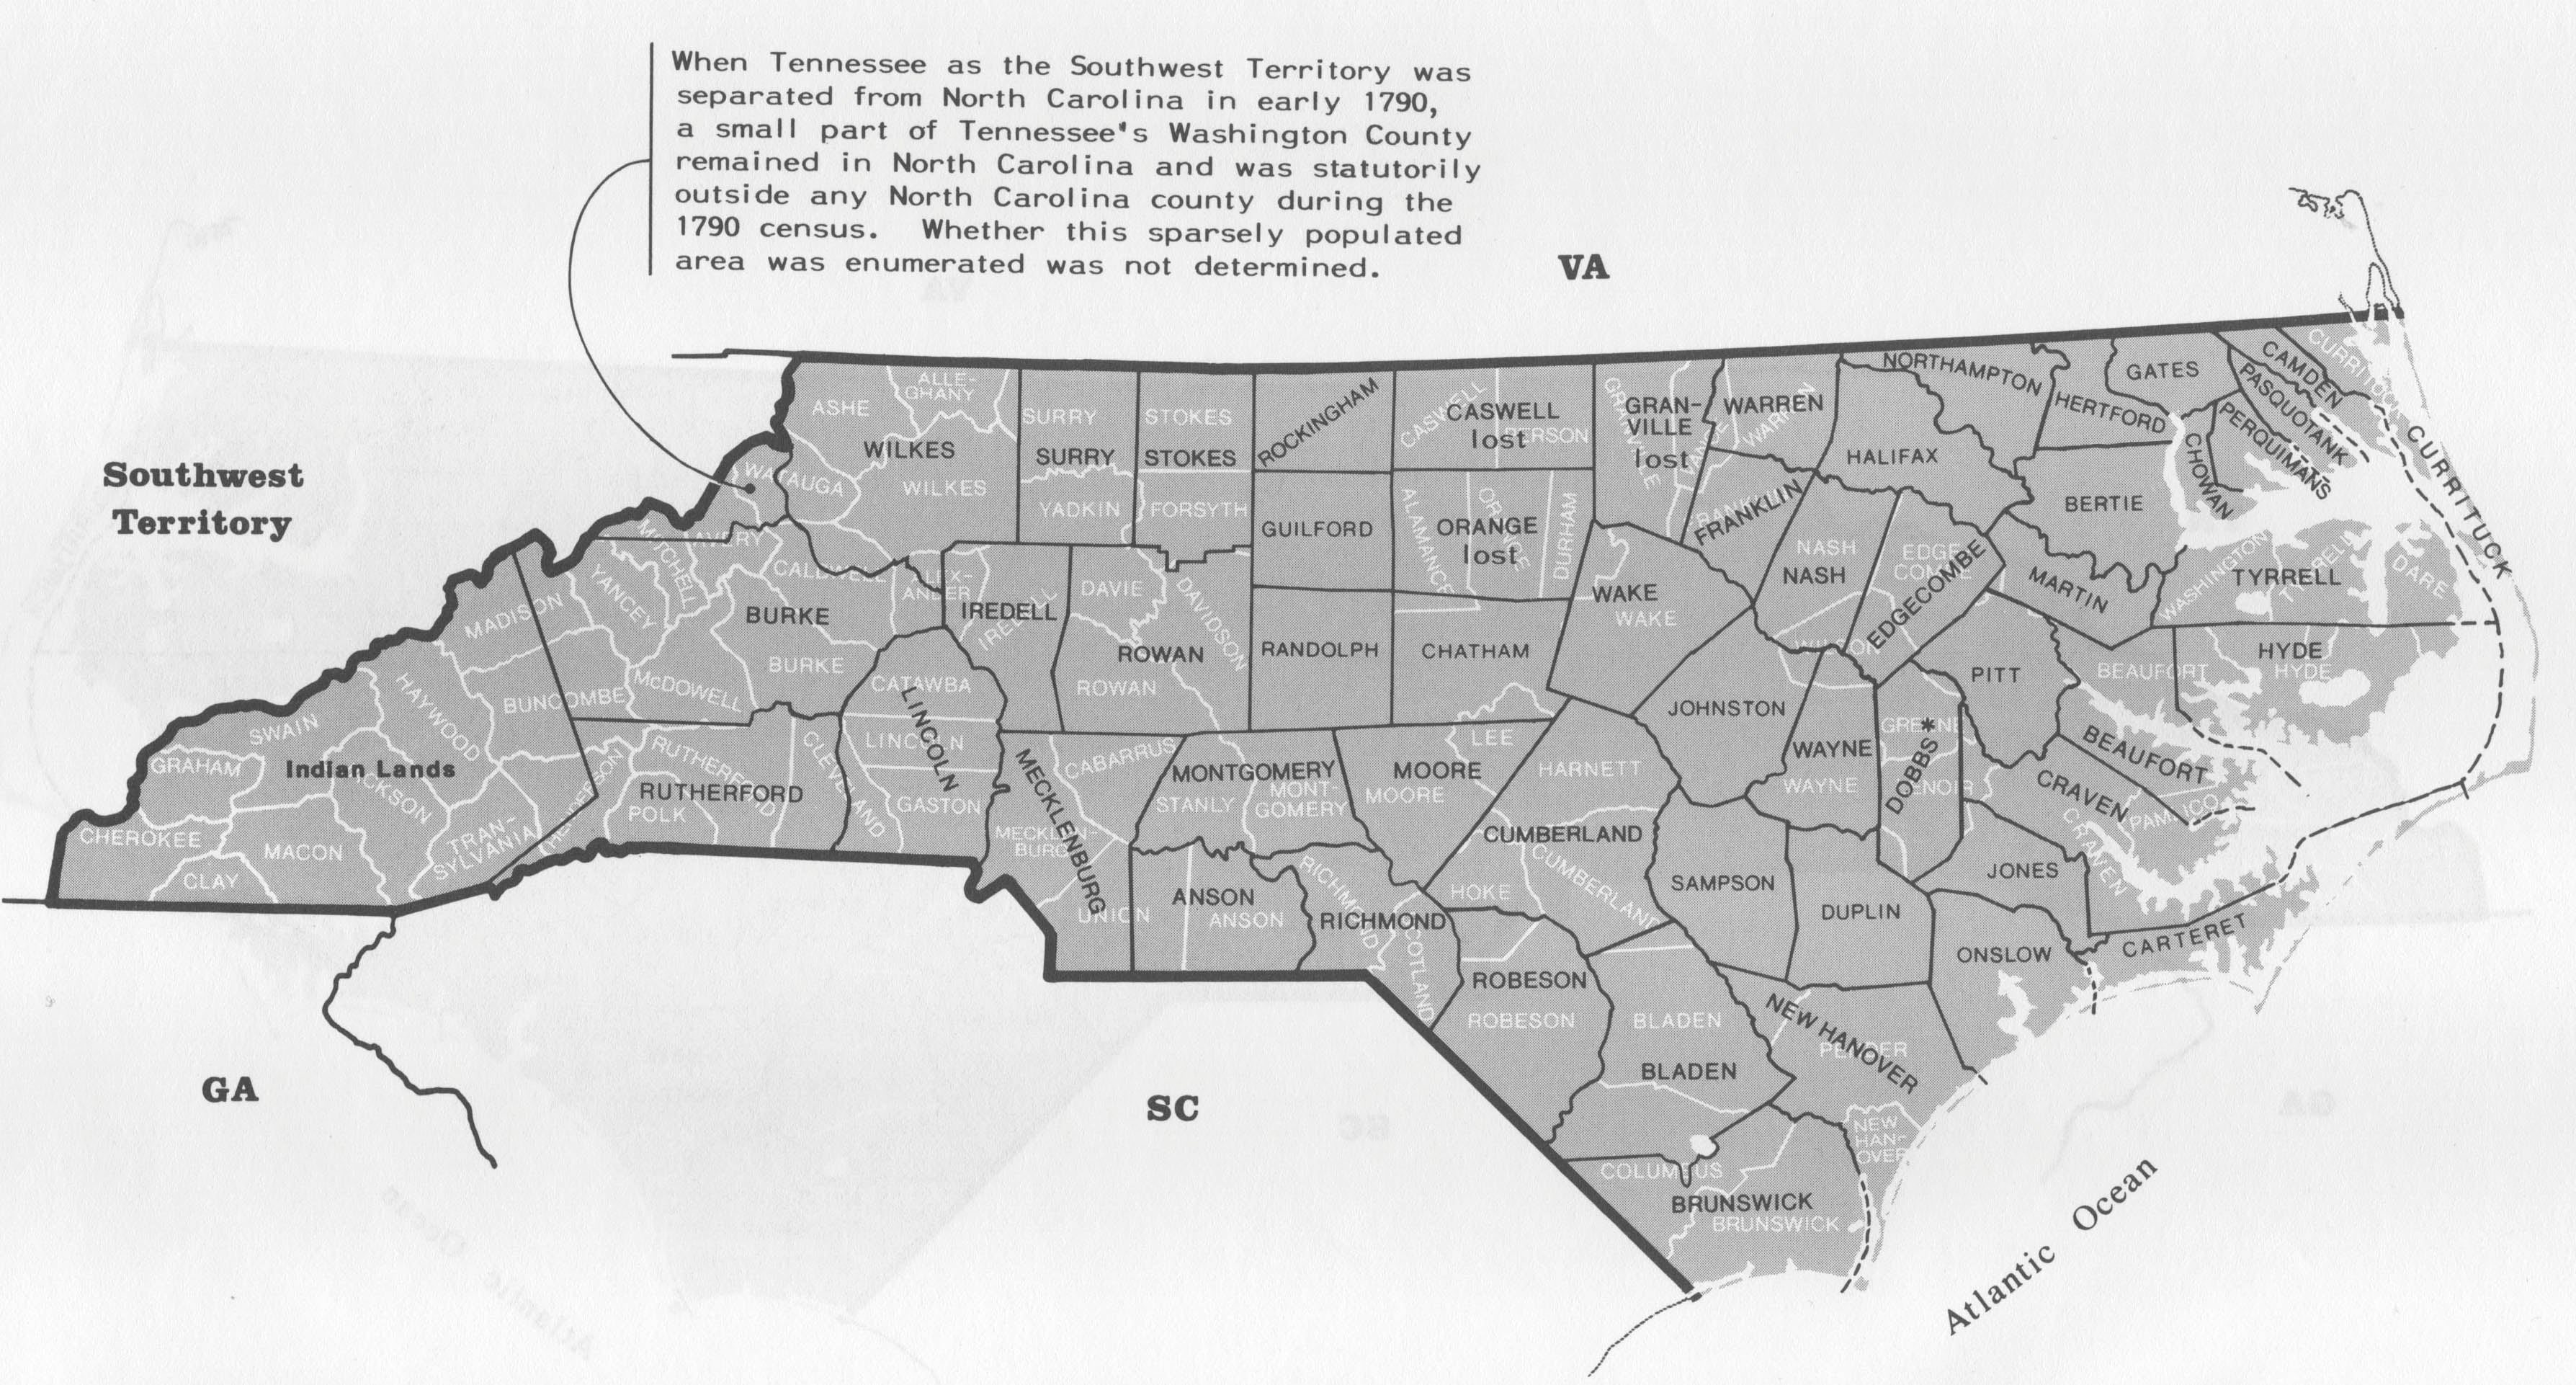 North Carolina Censuses & Substitute Name Lists 1660-2011 - SOFTBOUND